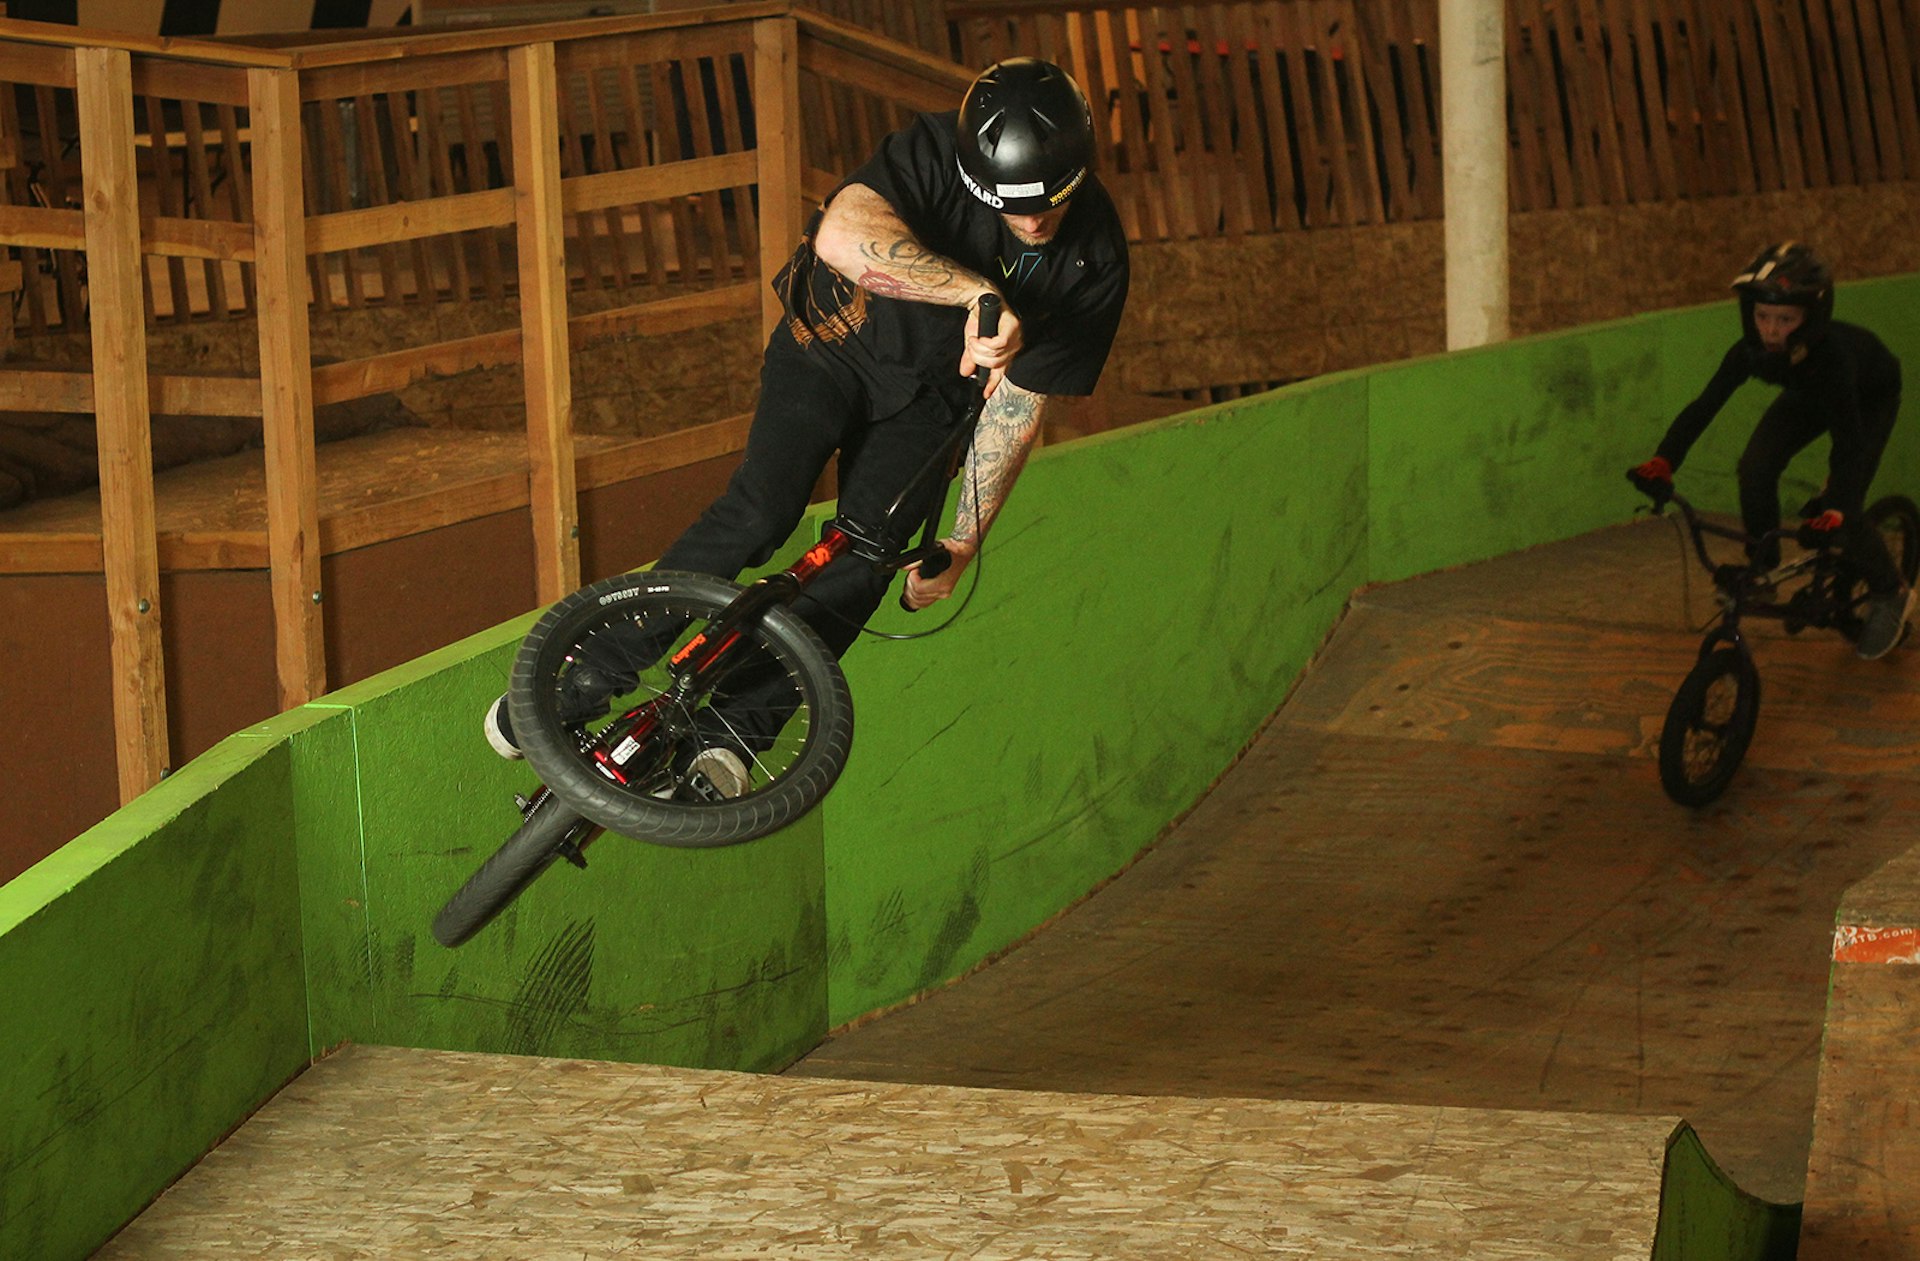 A man dressed in all black with tattooed arms jumps over a wooden ramp on a BMX bicycle at an indoor track. Another rider is coming up behind him to make the same jump.